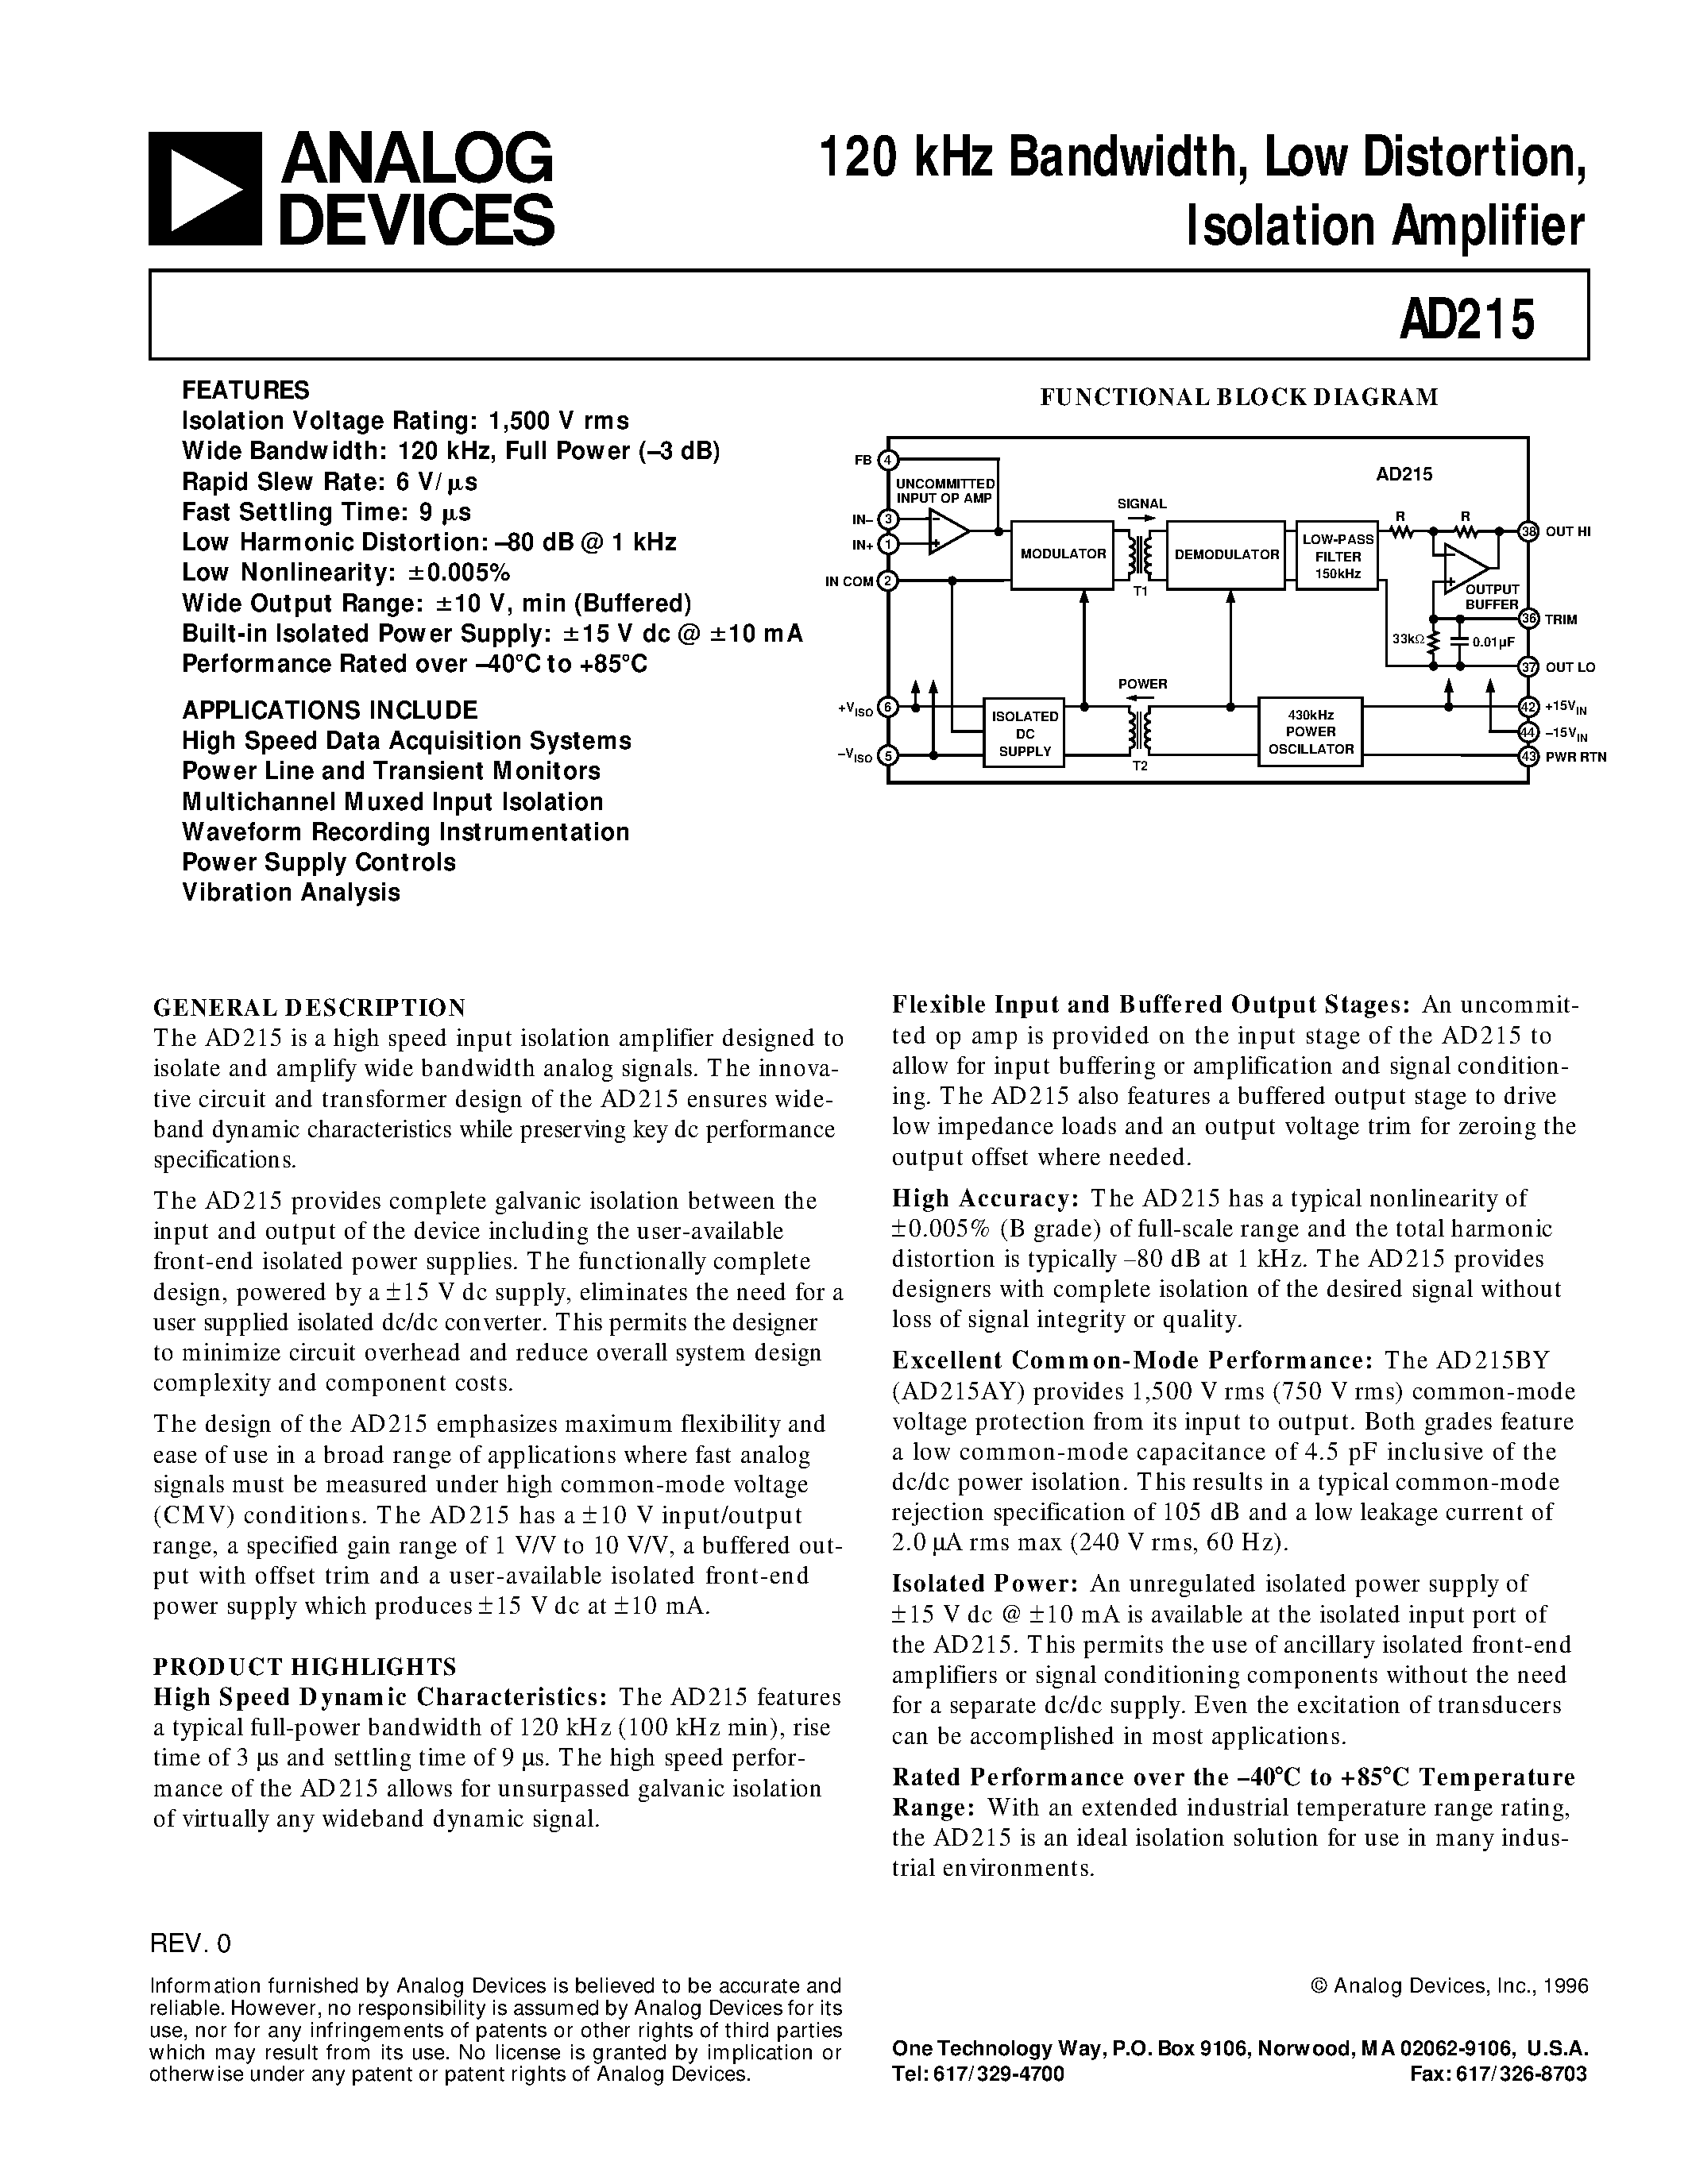 Datasheet AD215AY - 120 kHz Bandwidth/ Low Distortion/ Isolation Amplifier page 1